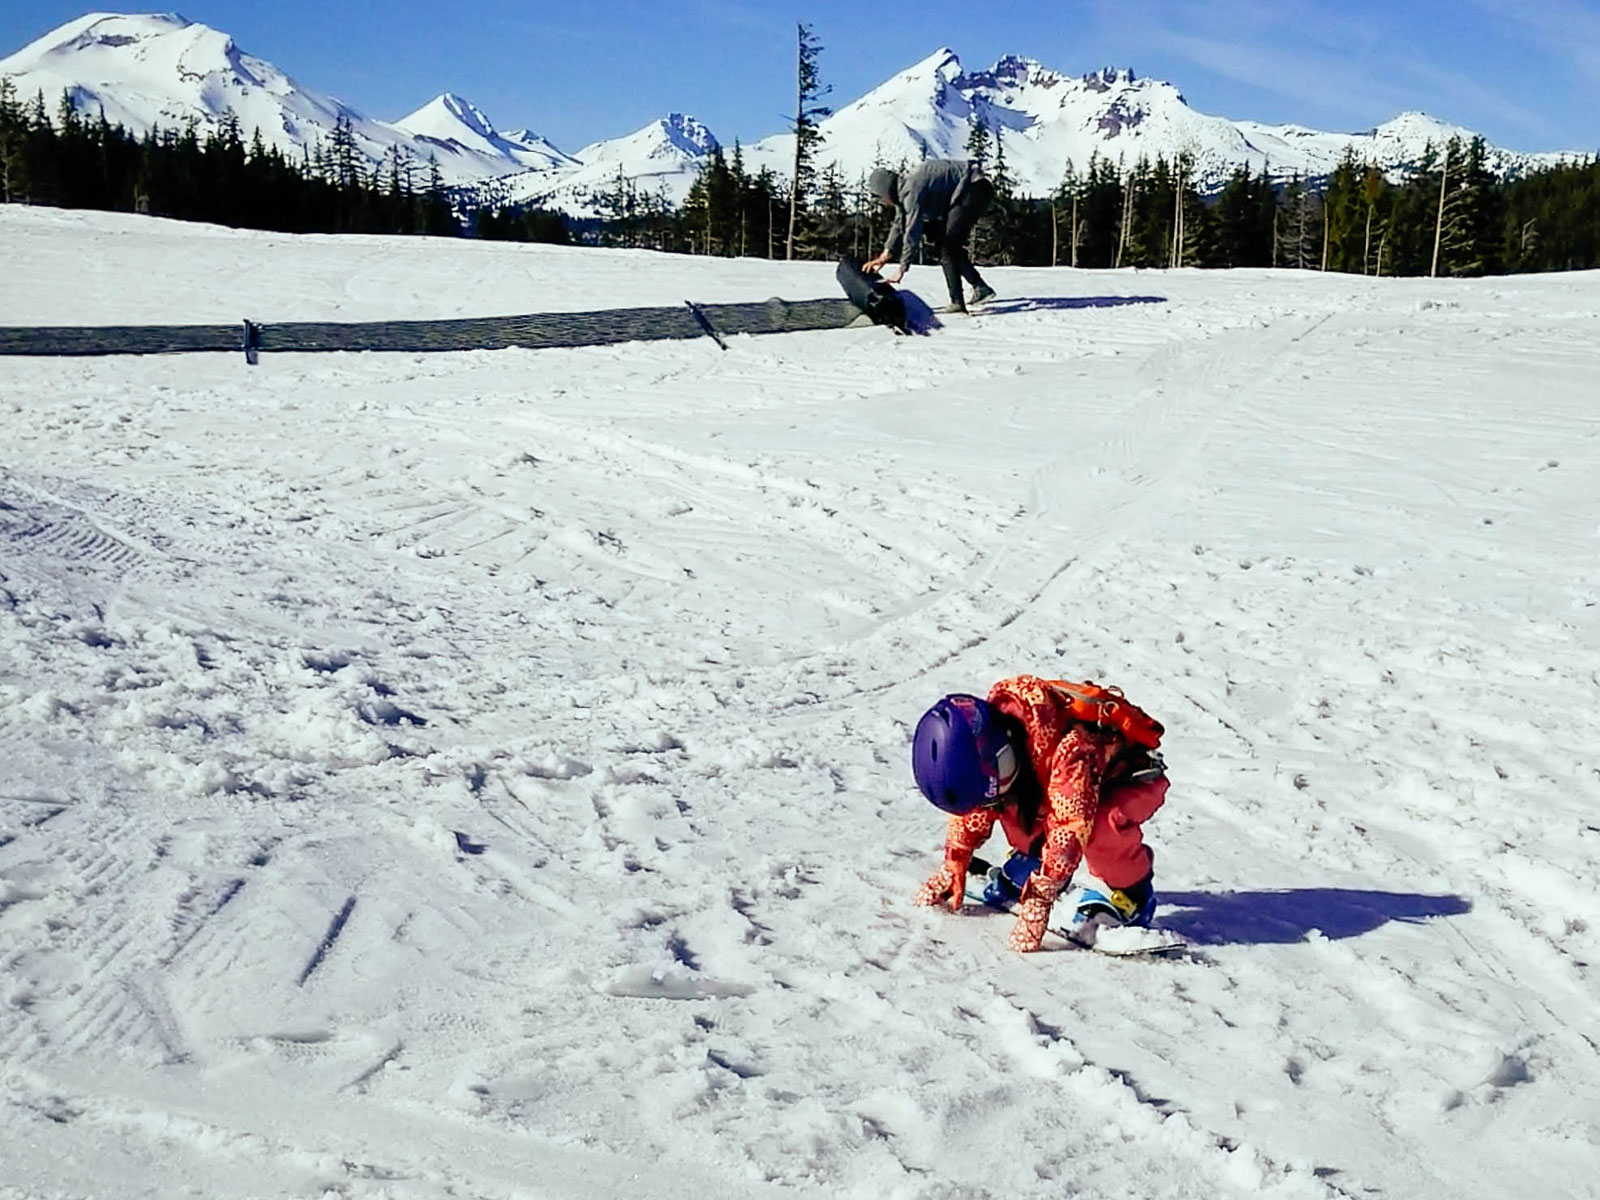 A 3-year-old toddler practicing toeside slipping on her snowboard